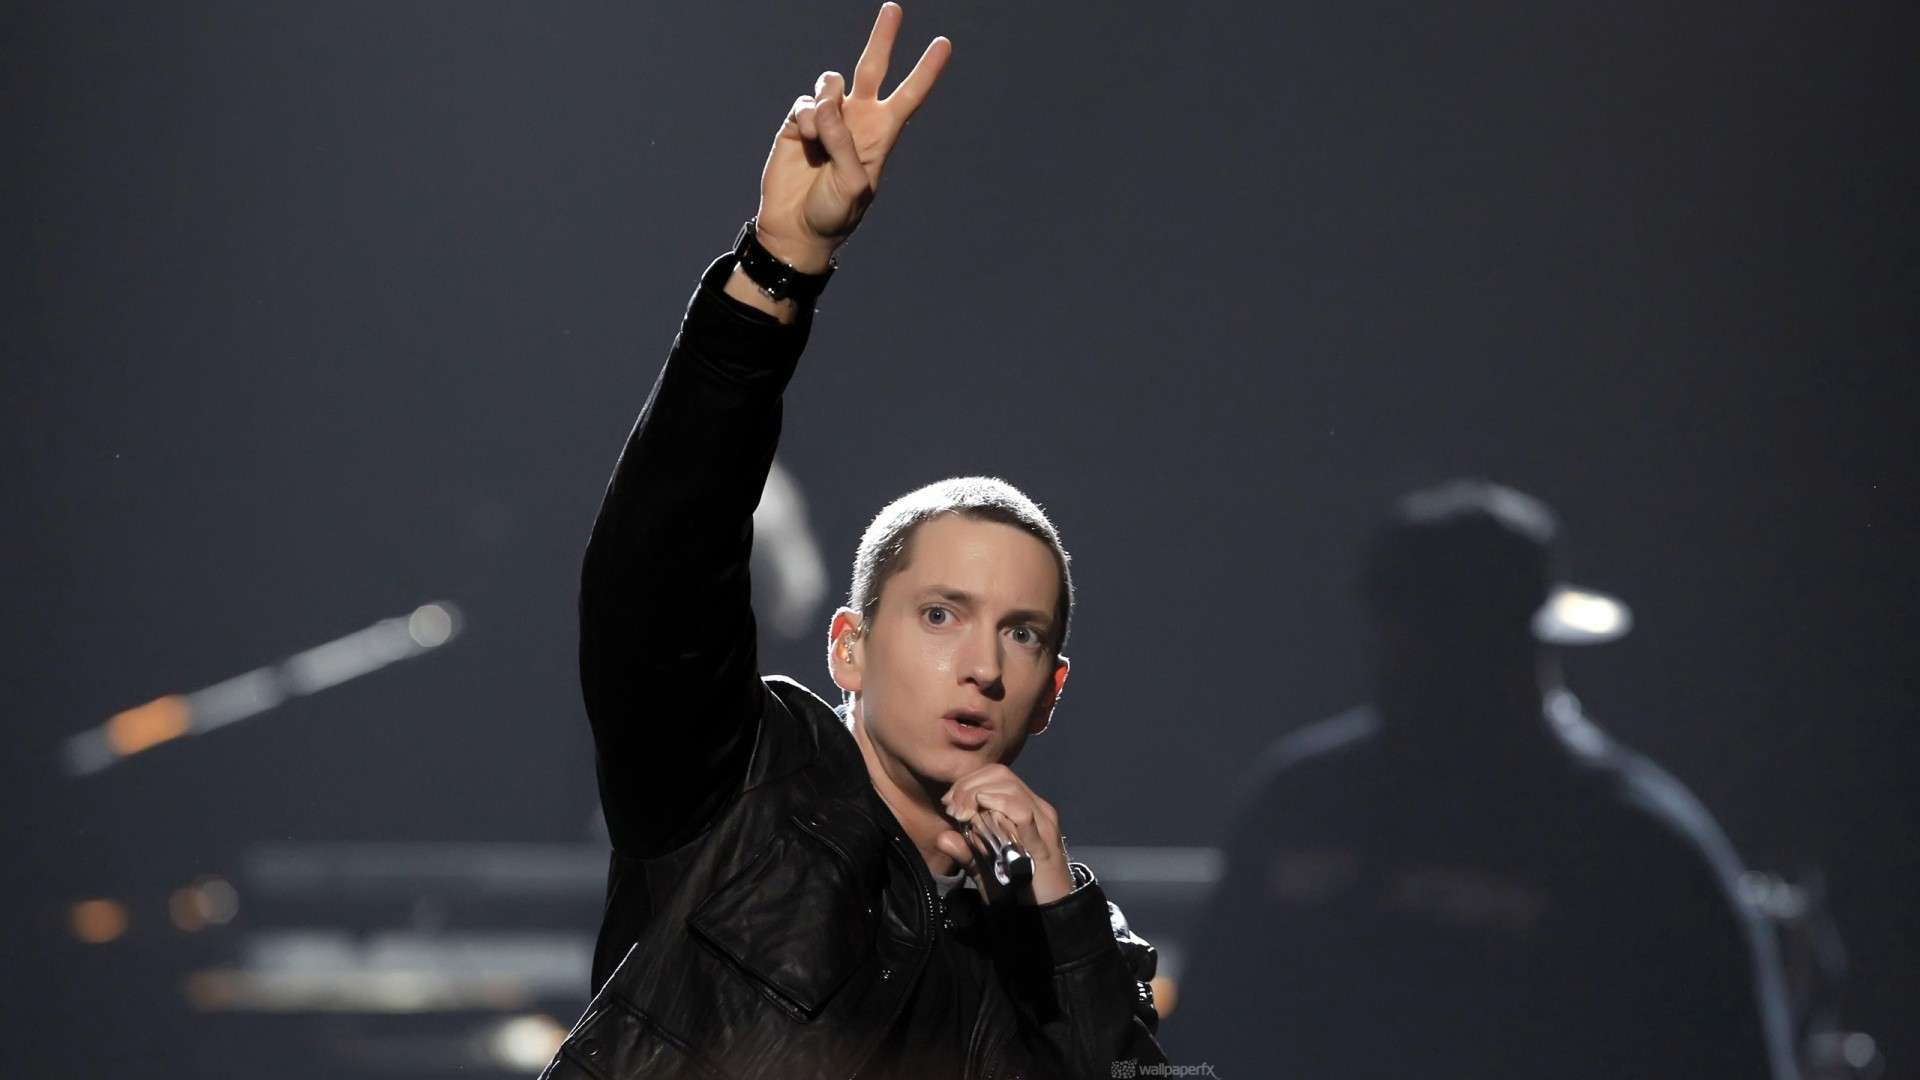 Eminem Hd Wallpapers - Eminem Hd Wallpapers 1080p , HD Wallpaper & Backgrounds